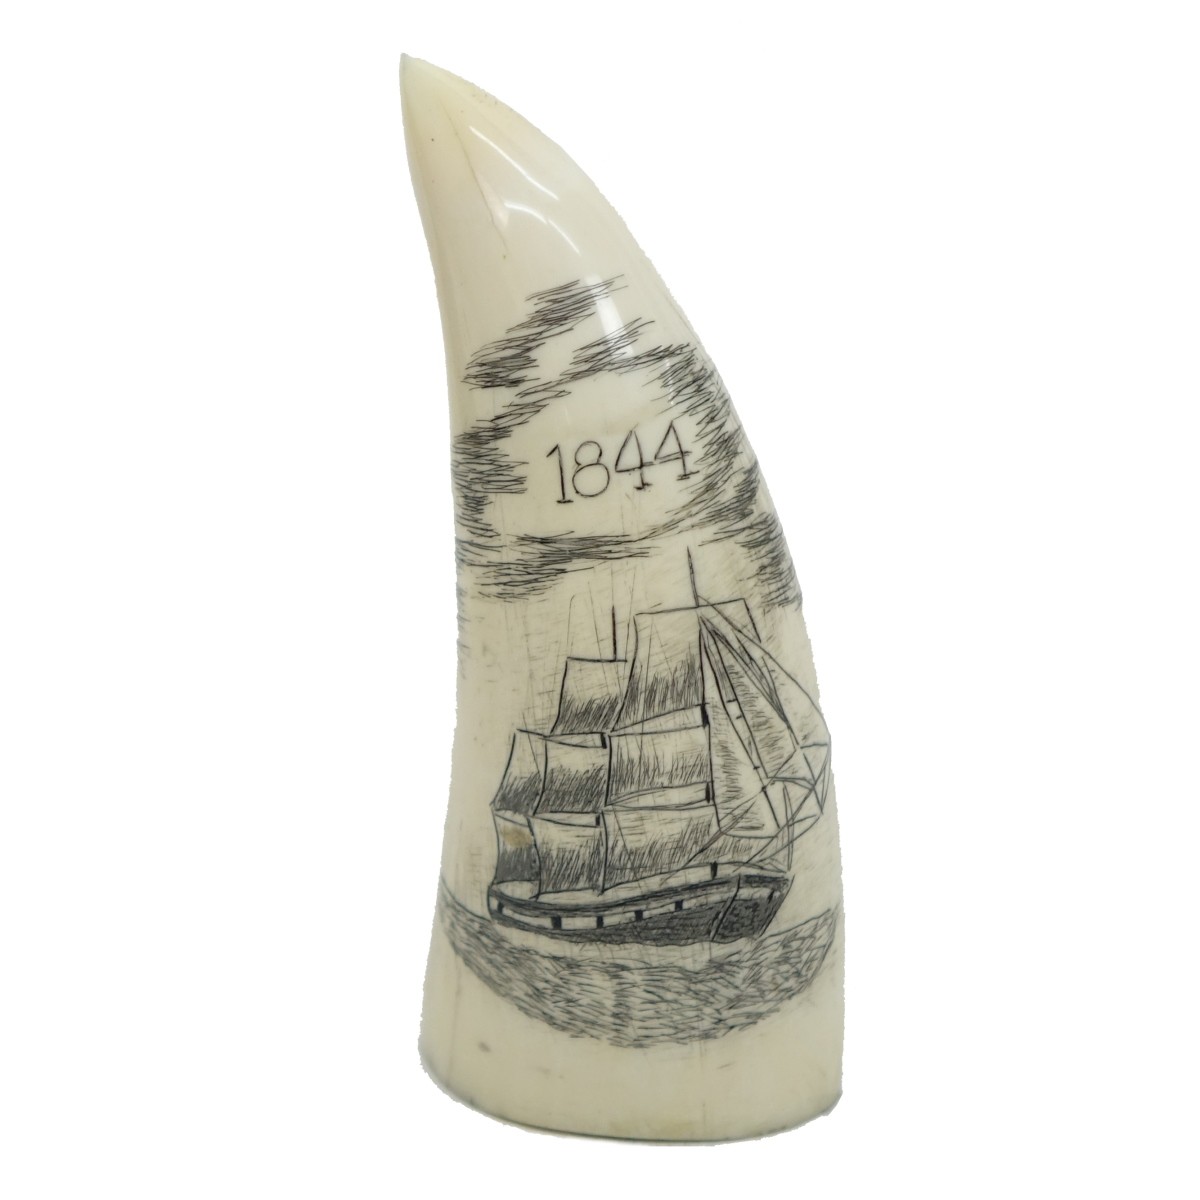 Two (2) Scrimshaw Tooth Carvings